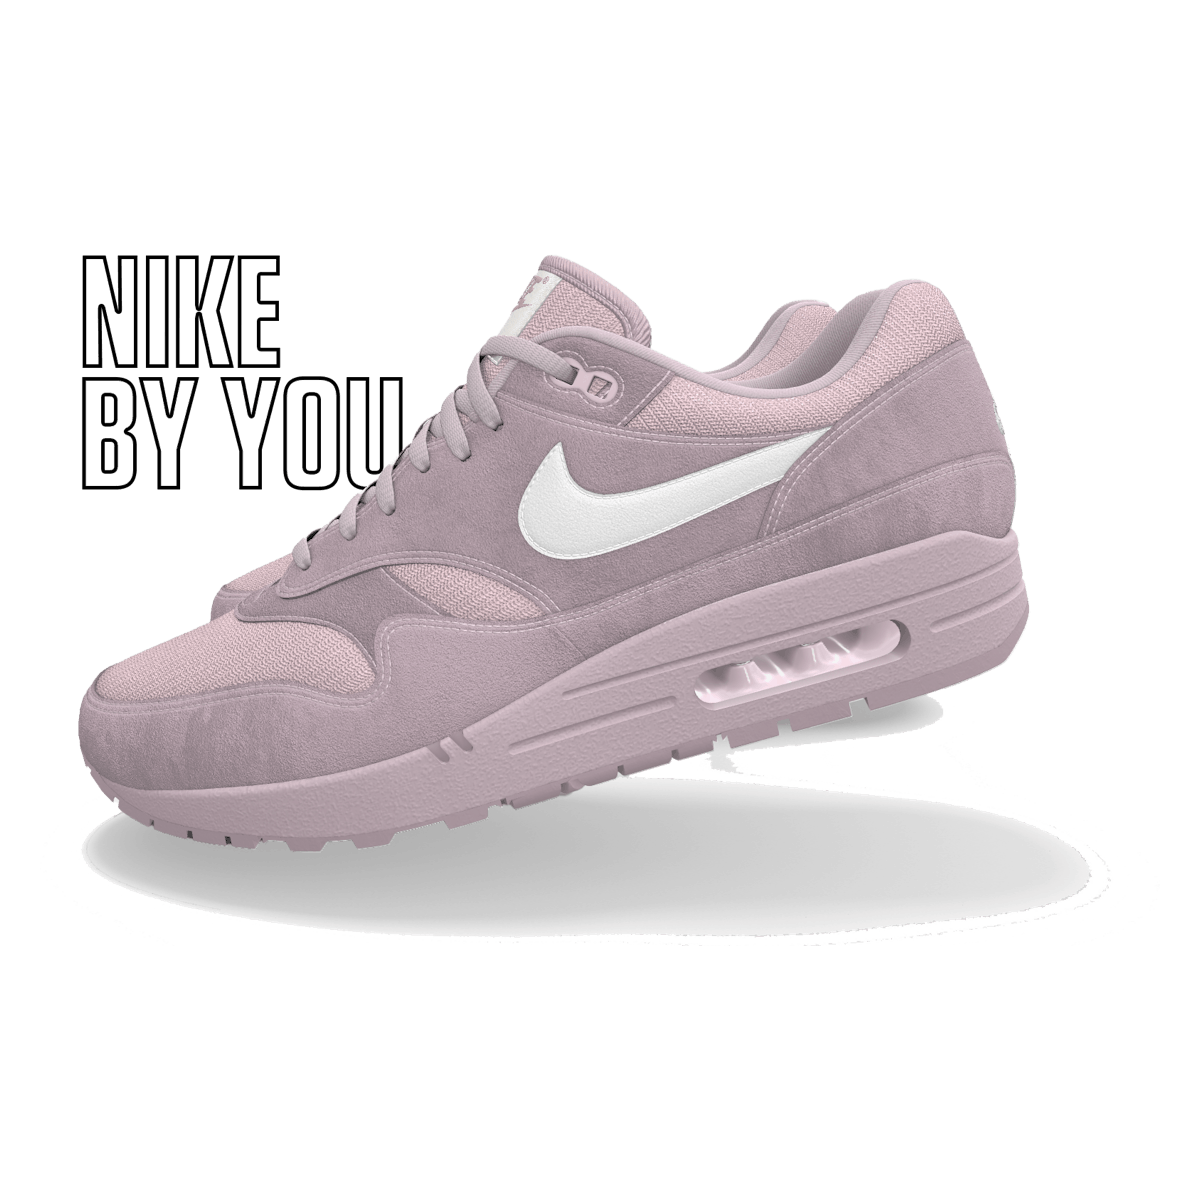 Nike Air Max 1 '87 "By You"